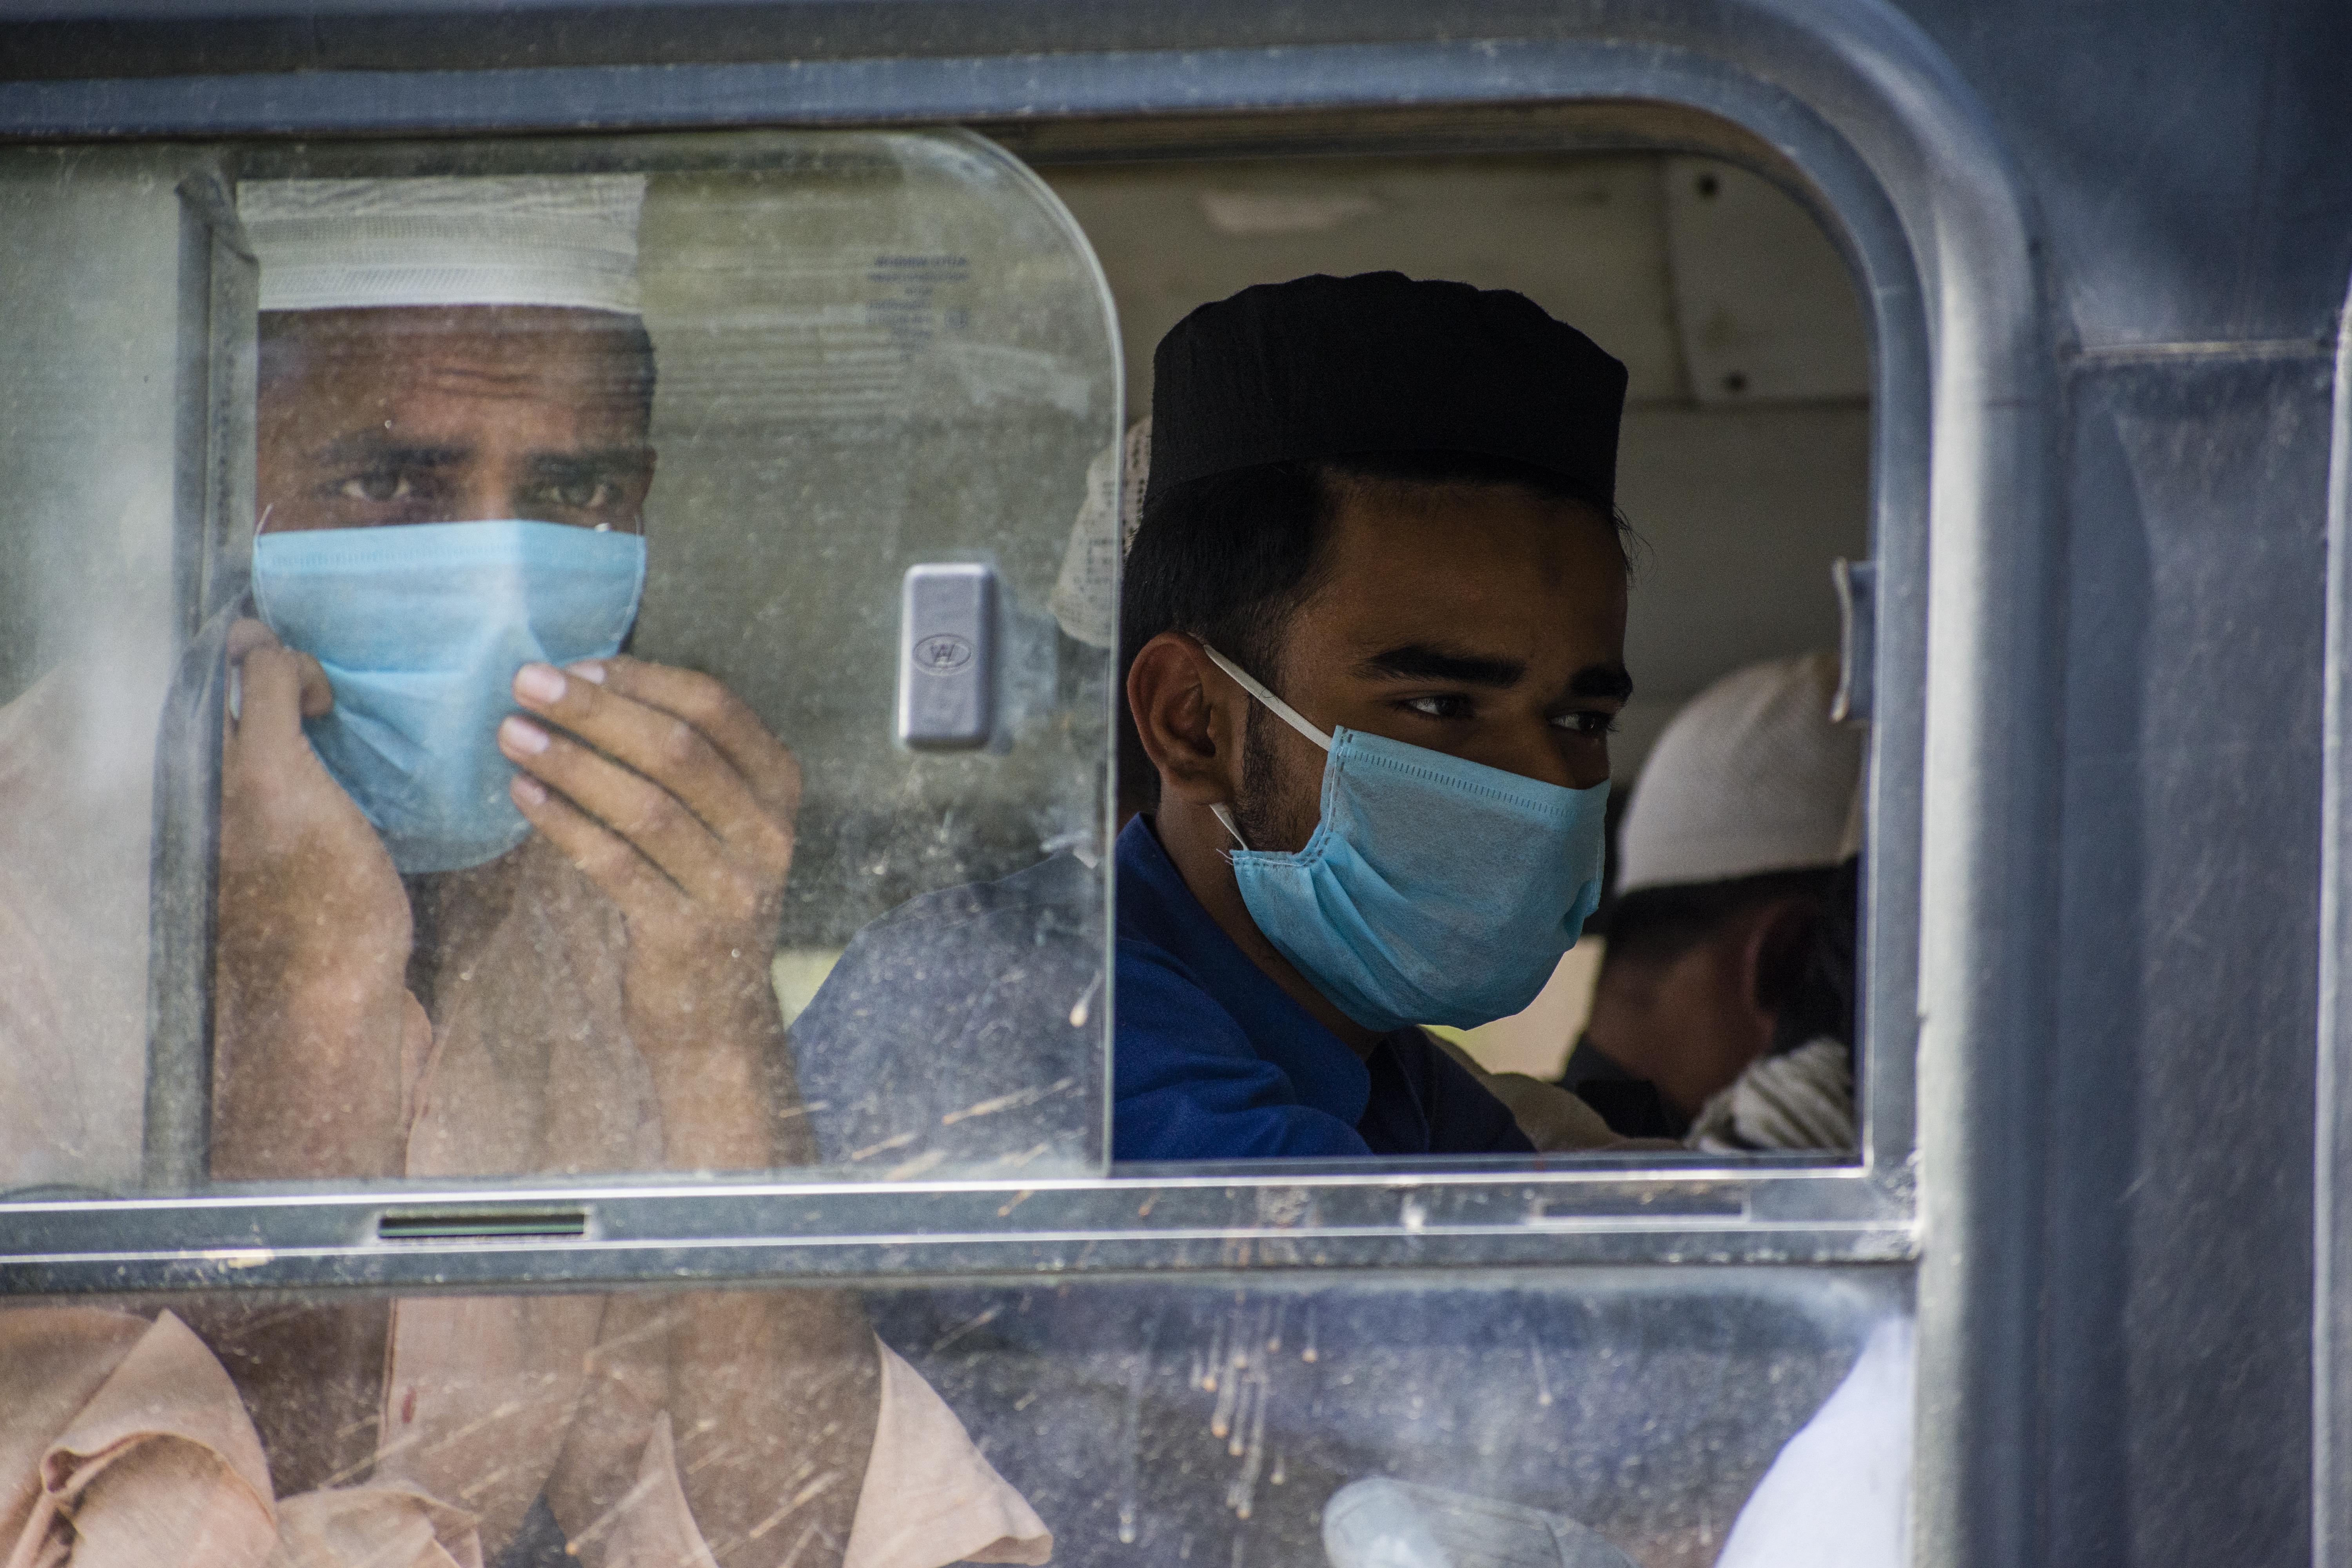 Men wearing surgical masks look out the window of a bus